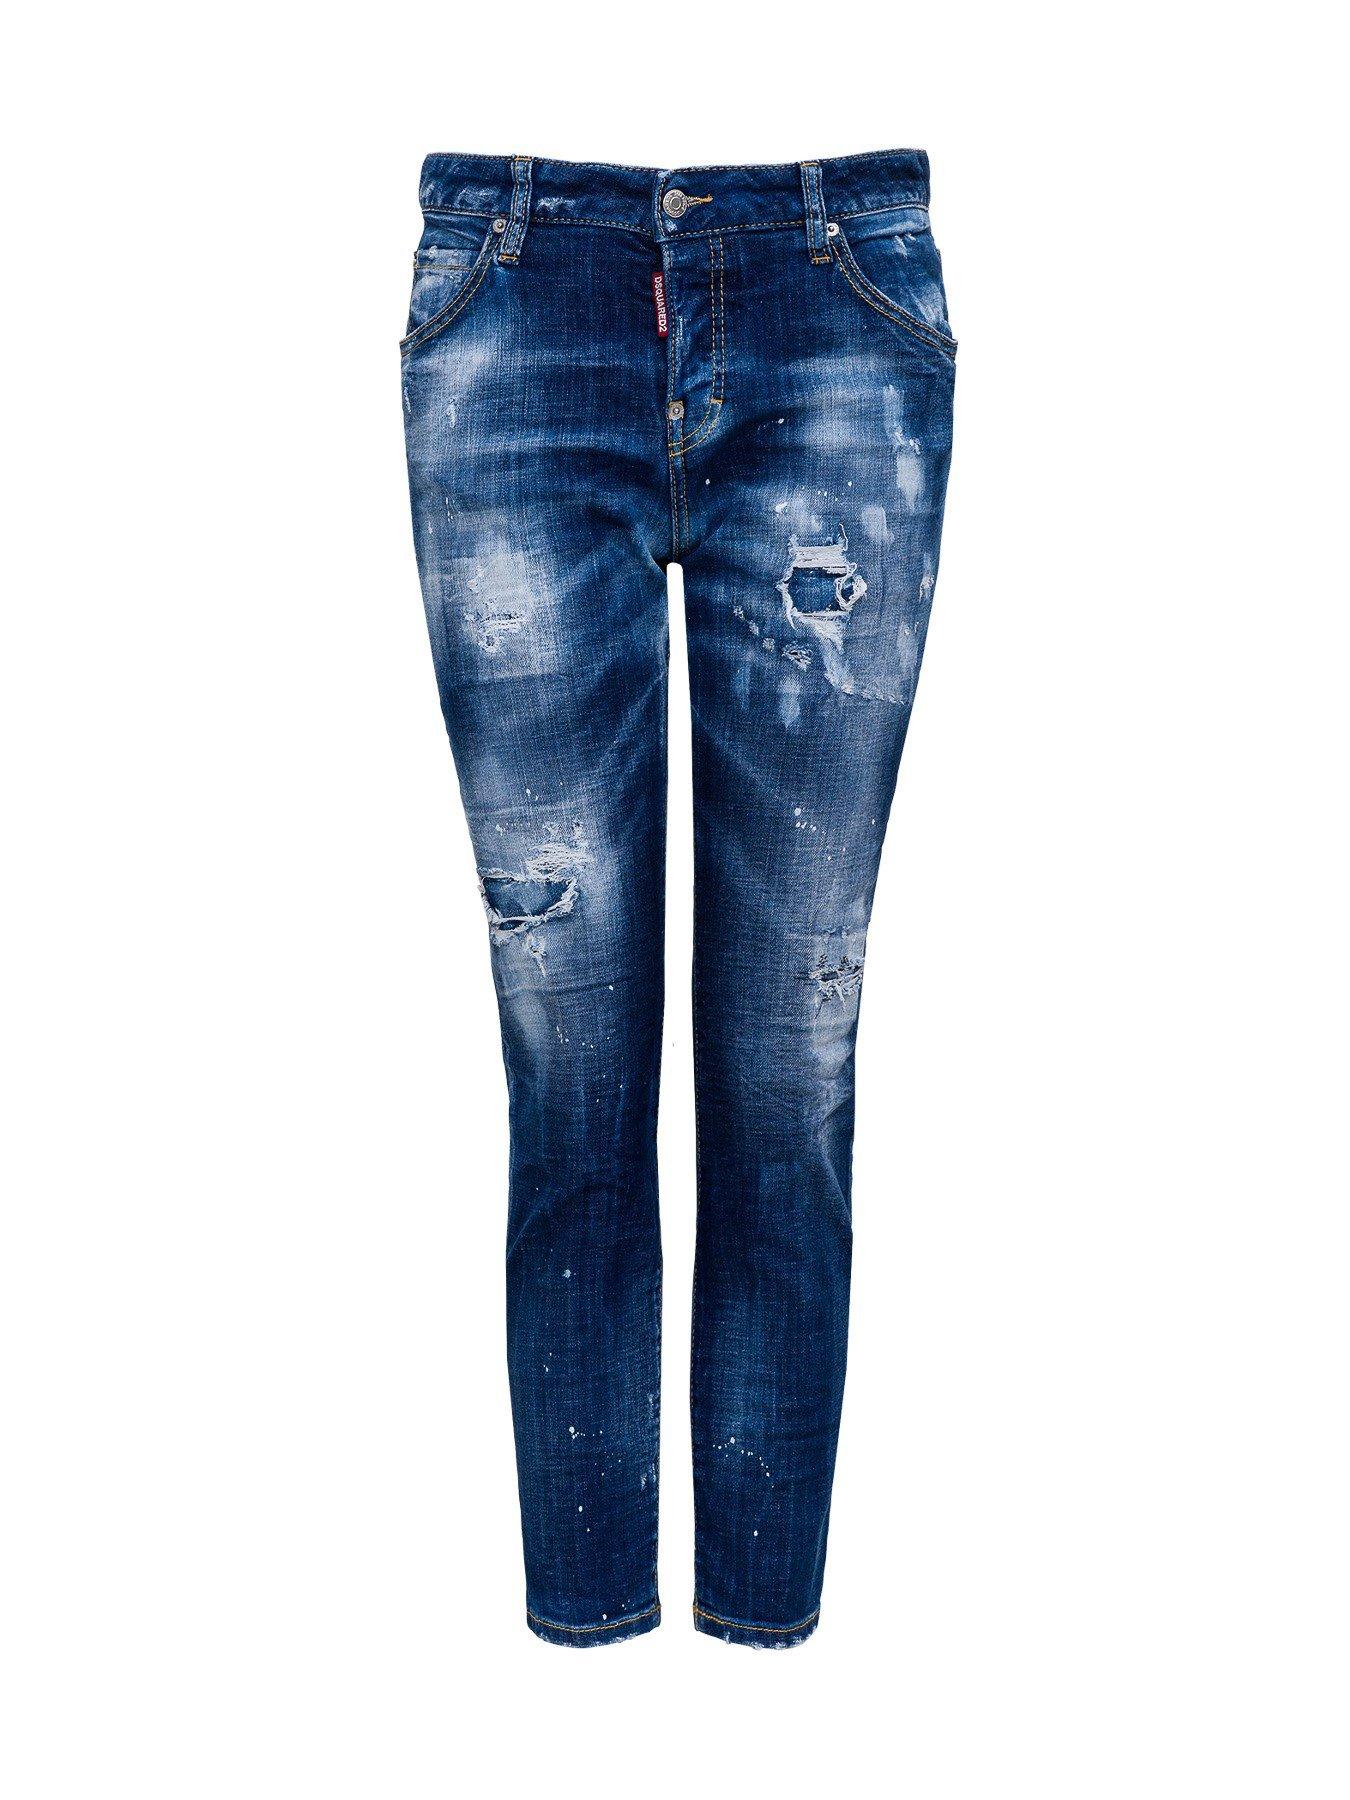 DSquared² Denim Turn-up Distressed Jeans in Blue - Lyst